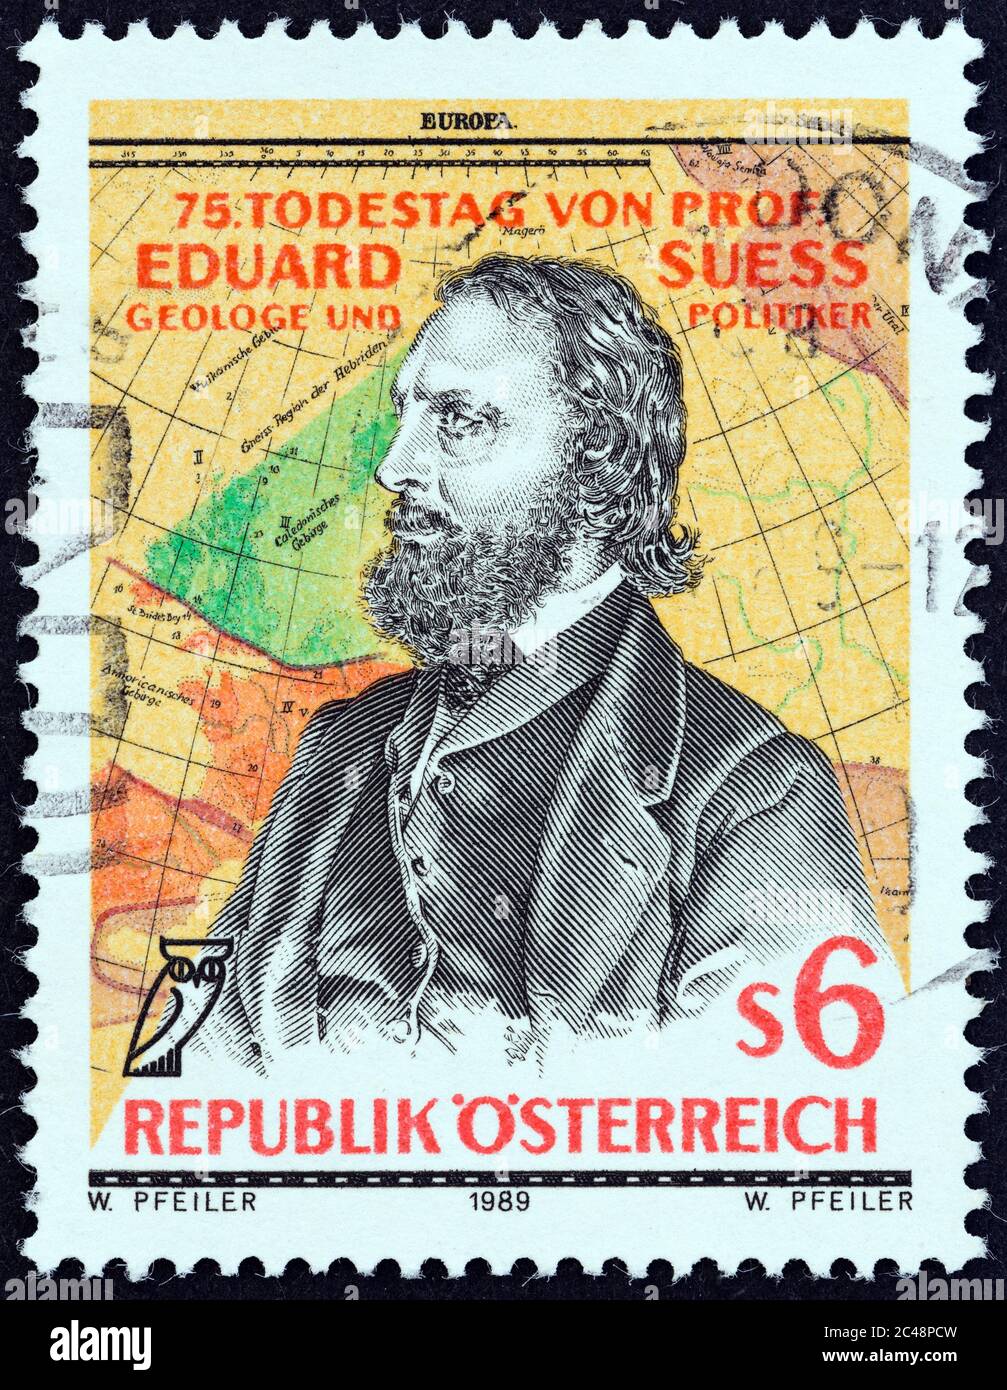 AUSTRIA - CIRCA 1989: A stamp printed in Austria shows geologist and politician Eduard Suess after Josef Kriehuber and Map, circa 1989. Stock Photo